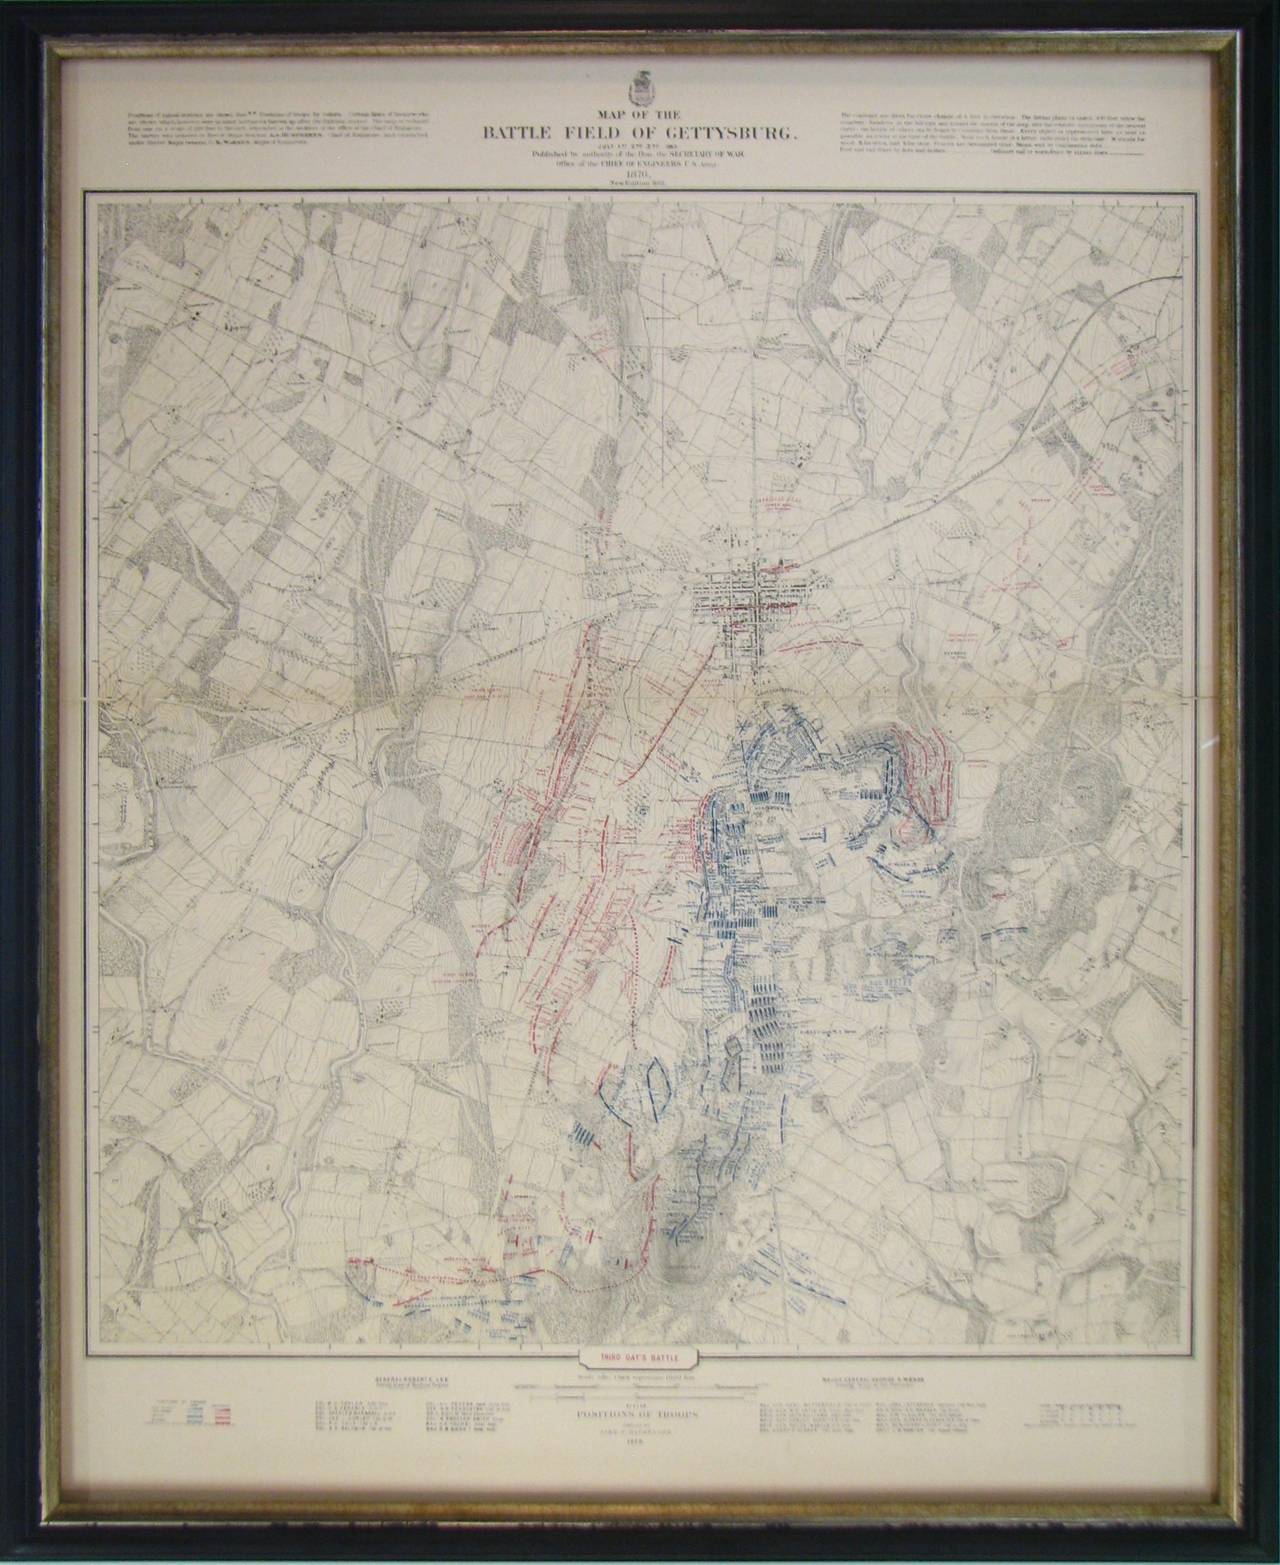 This is the 1876 first edition of John B. Bachelder’s three-part set of Gettysburg battlefield maps.  This is by far the finest early depiction of the largest and bloodiest battle ever fought on American soil, believed by many to have marked the